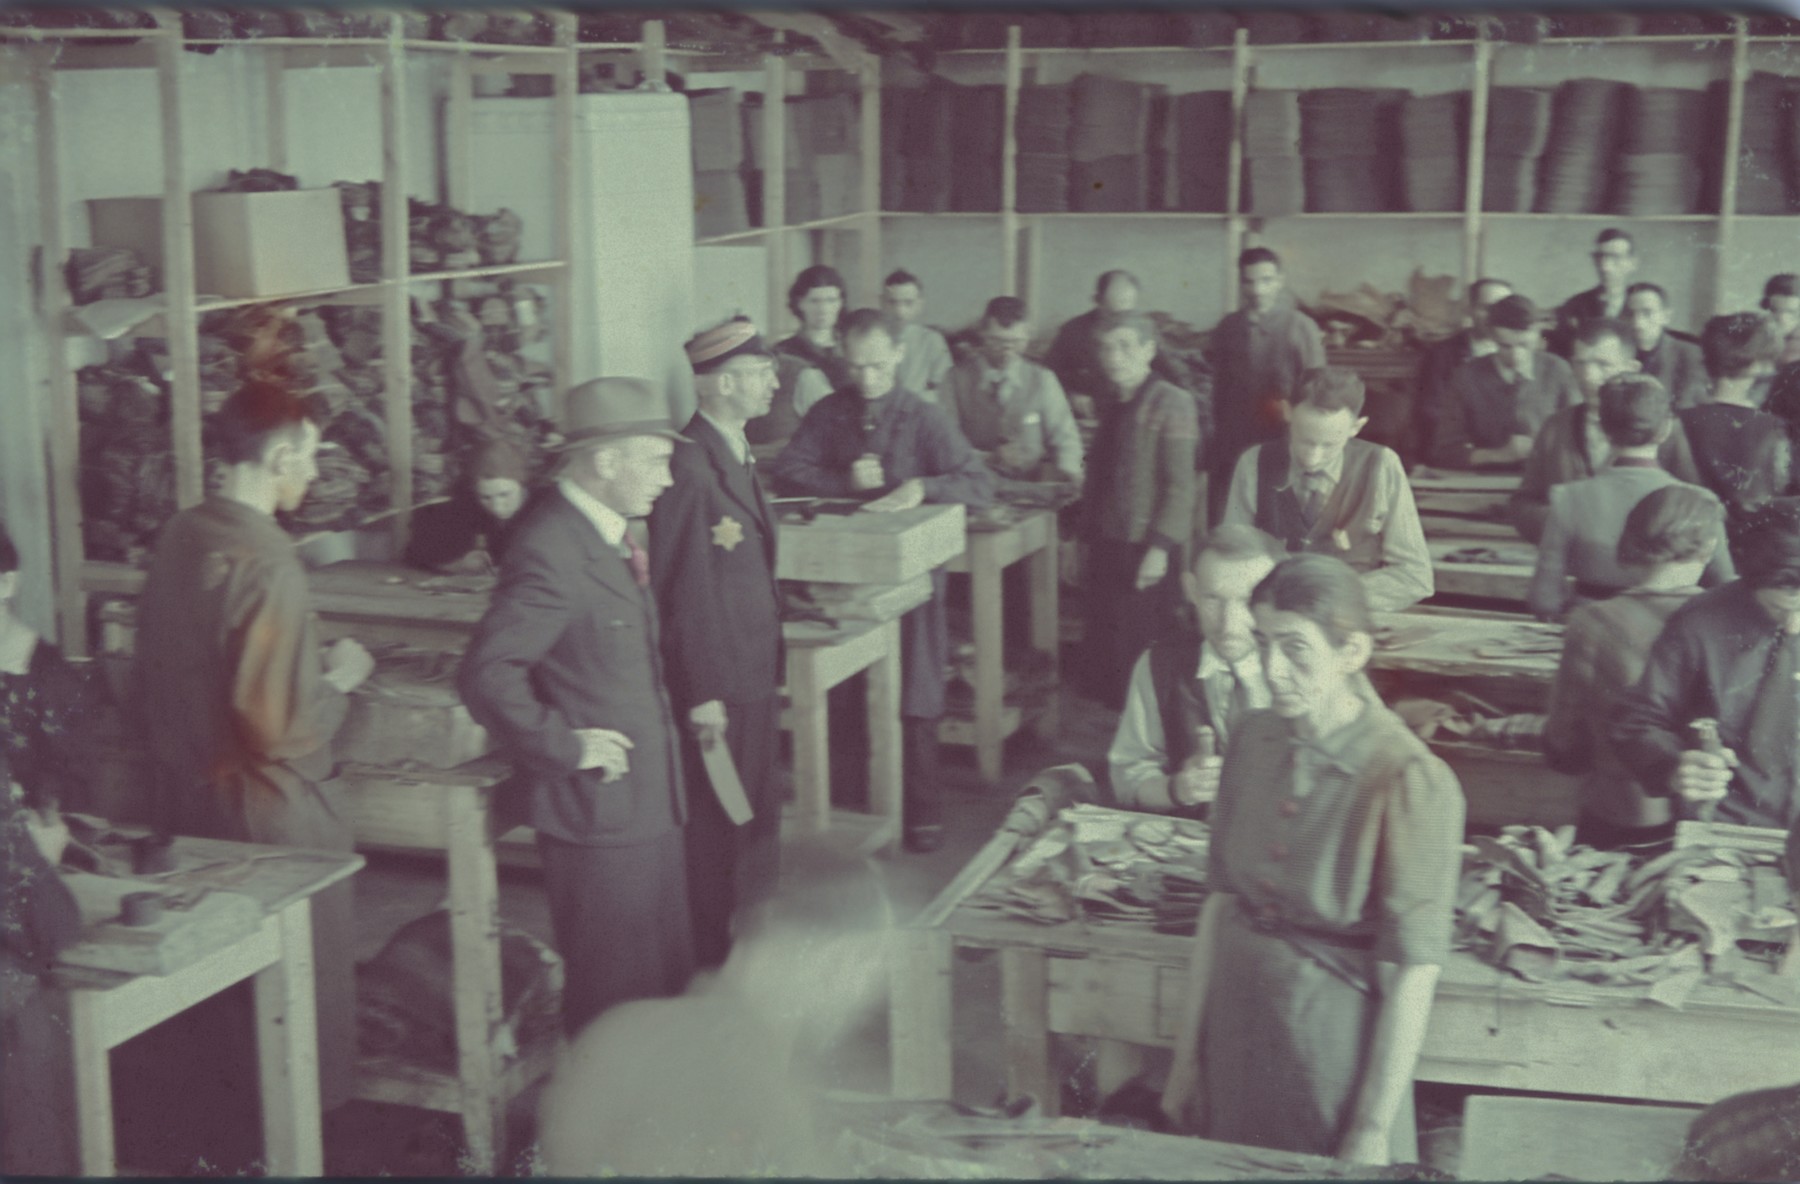 Workers at the saddle-making workshop stand next to their work tables in the Lodz ghetto.

Original German caption: "Litzmannstadt-Get, Sattlerei" (saddlery).